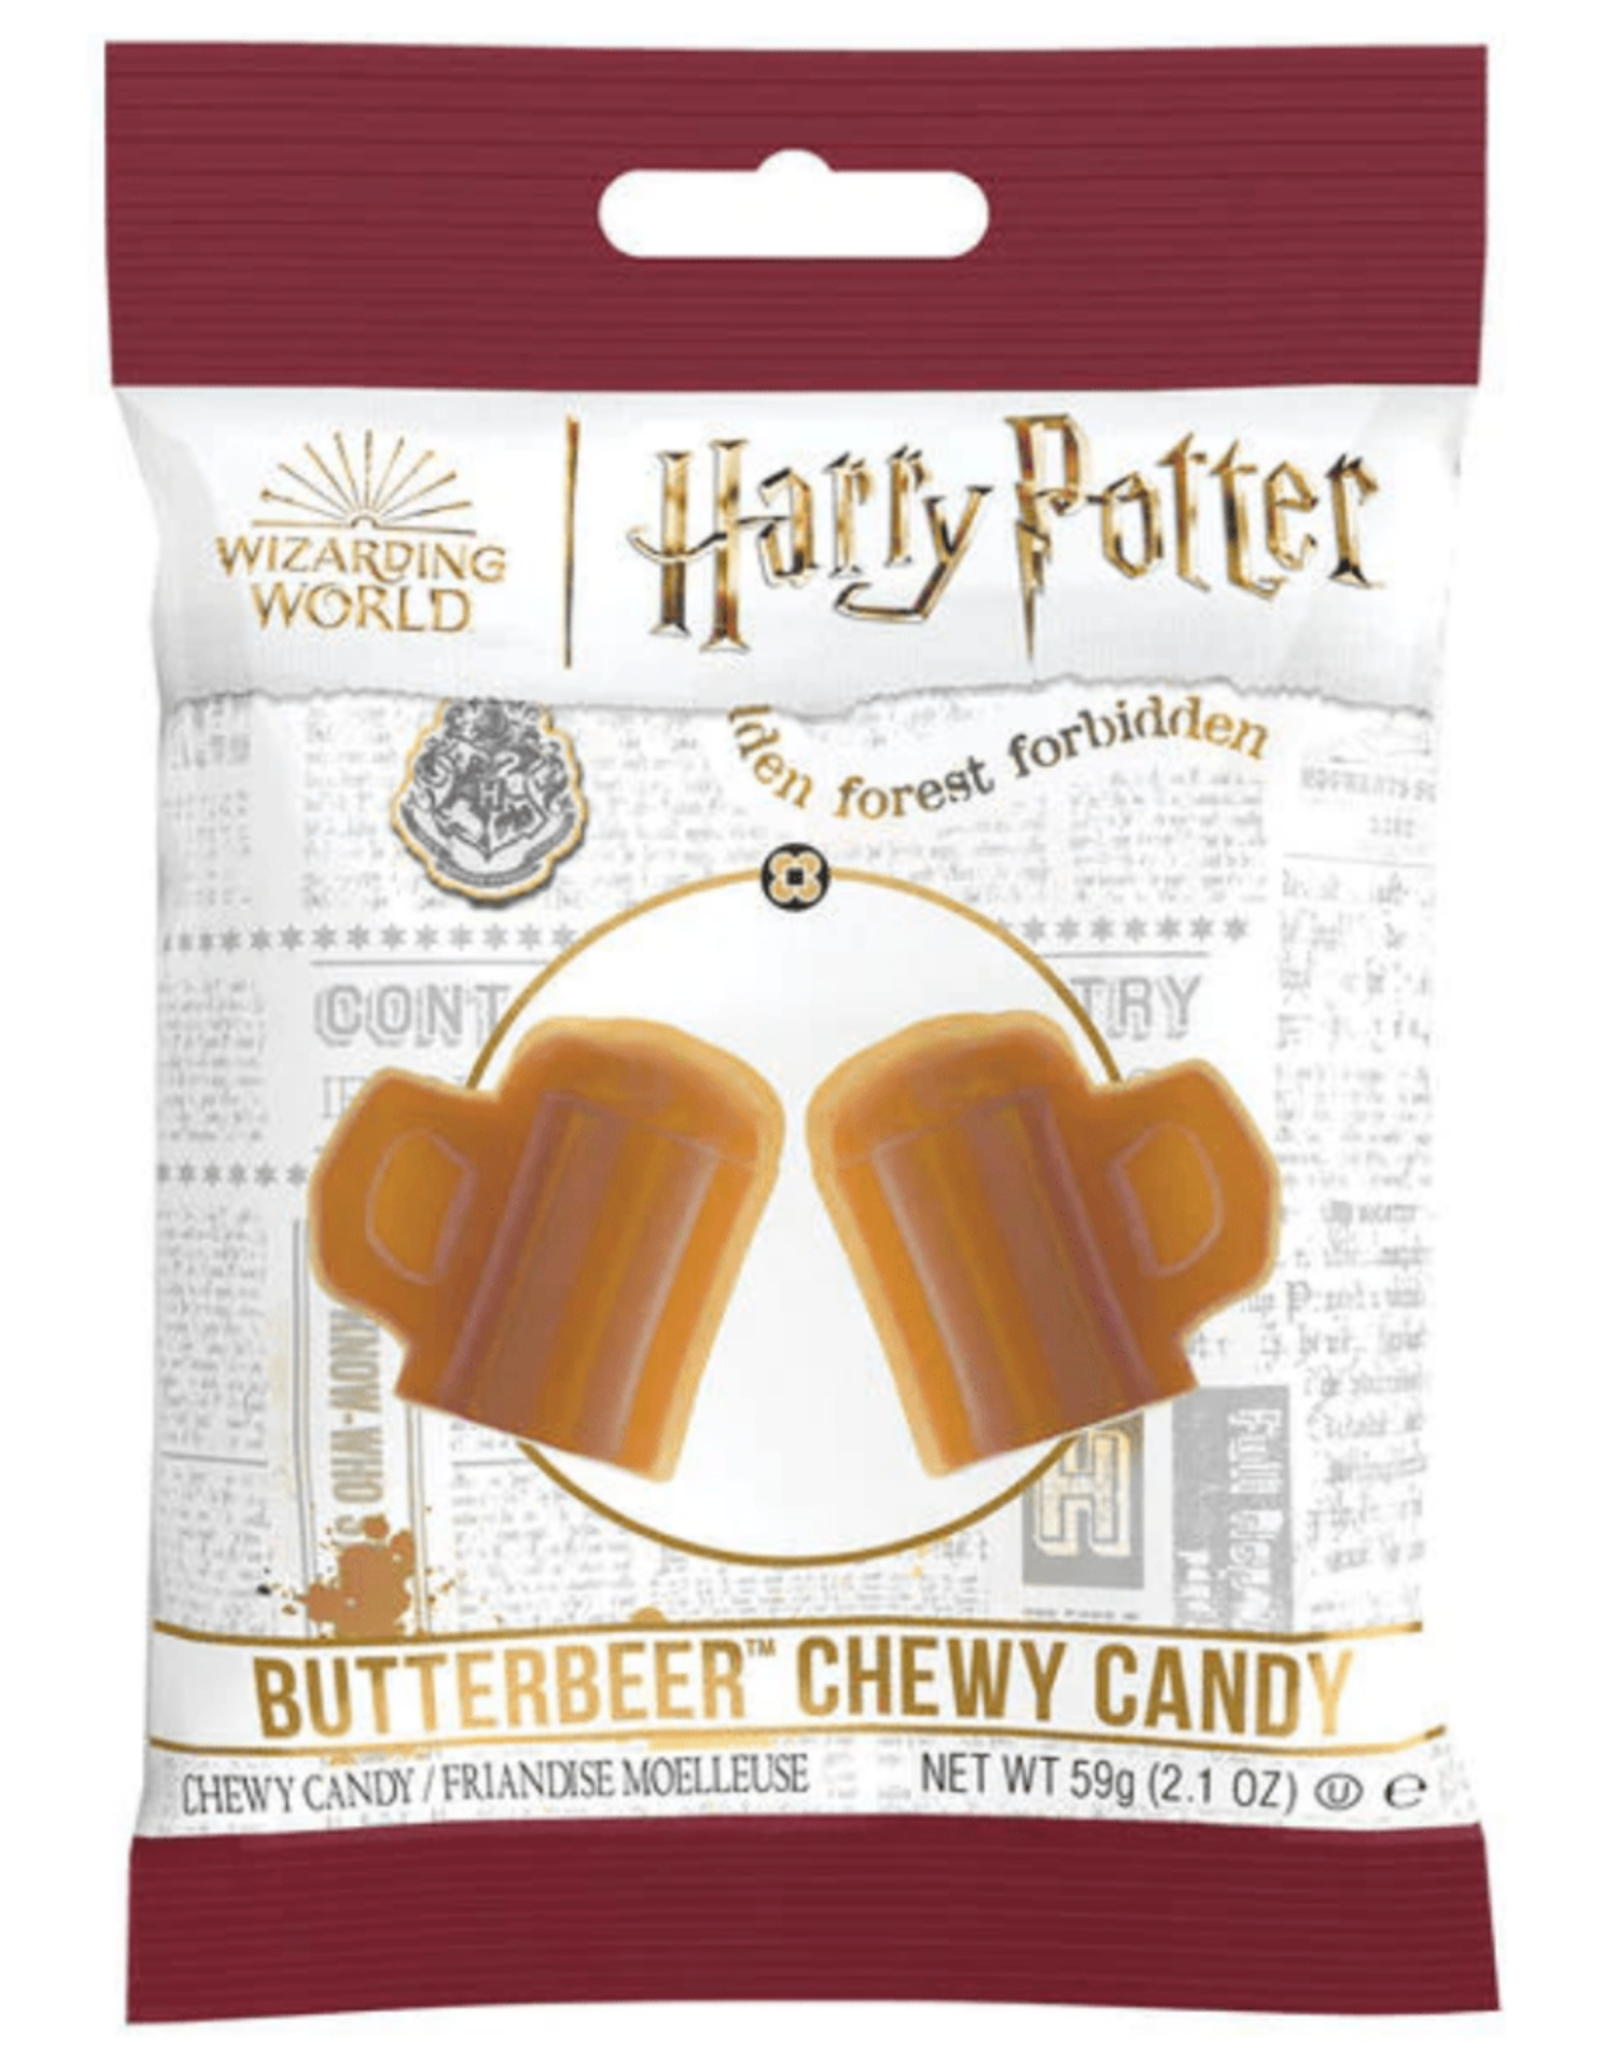 Jelly Belly Harry Potter Butterbeer Chewy Candy